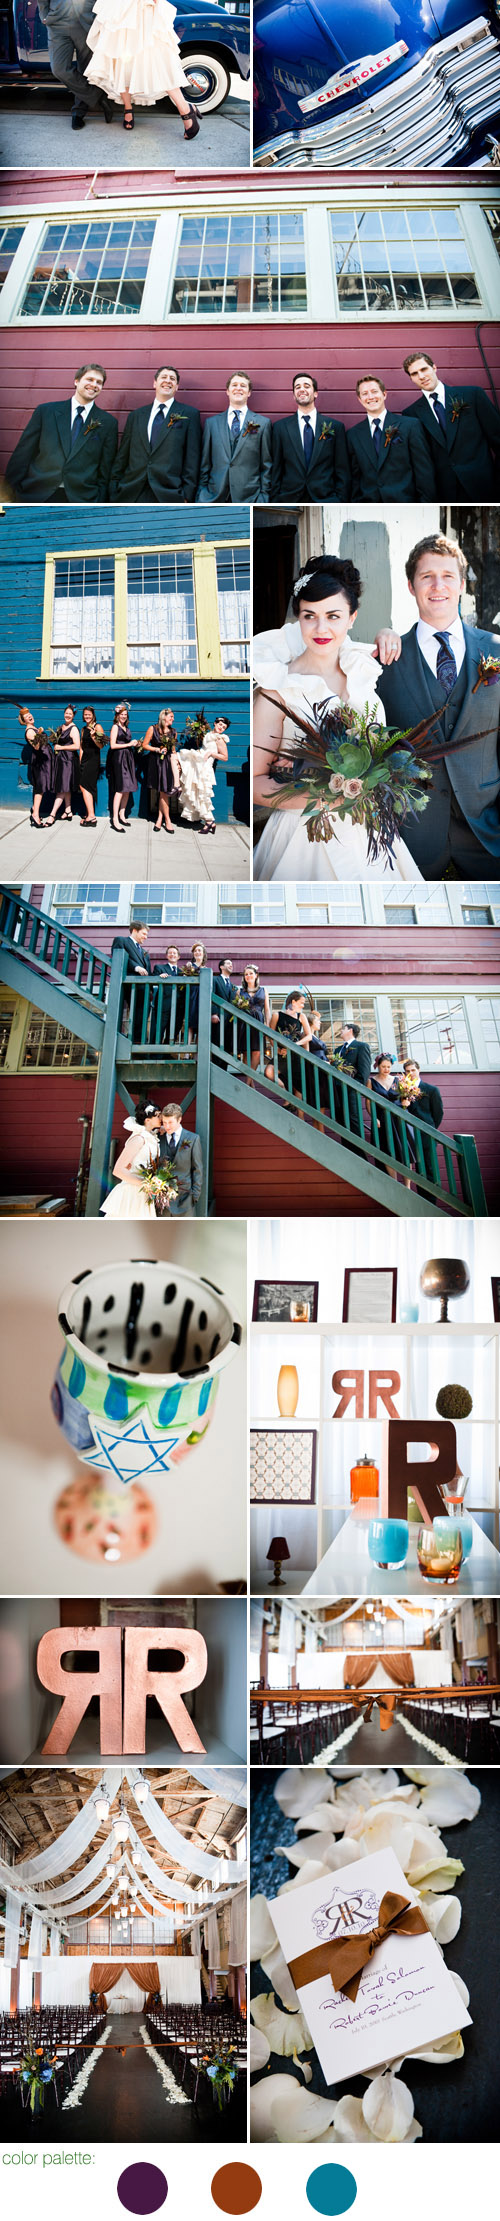 dramatic and stylish Seattle real wedding at Sodo Park, images by Laurel McConnell Photography